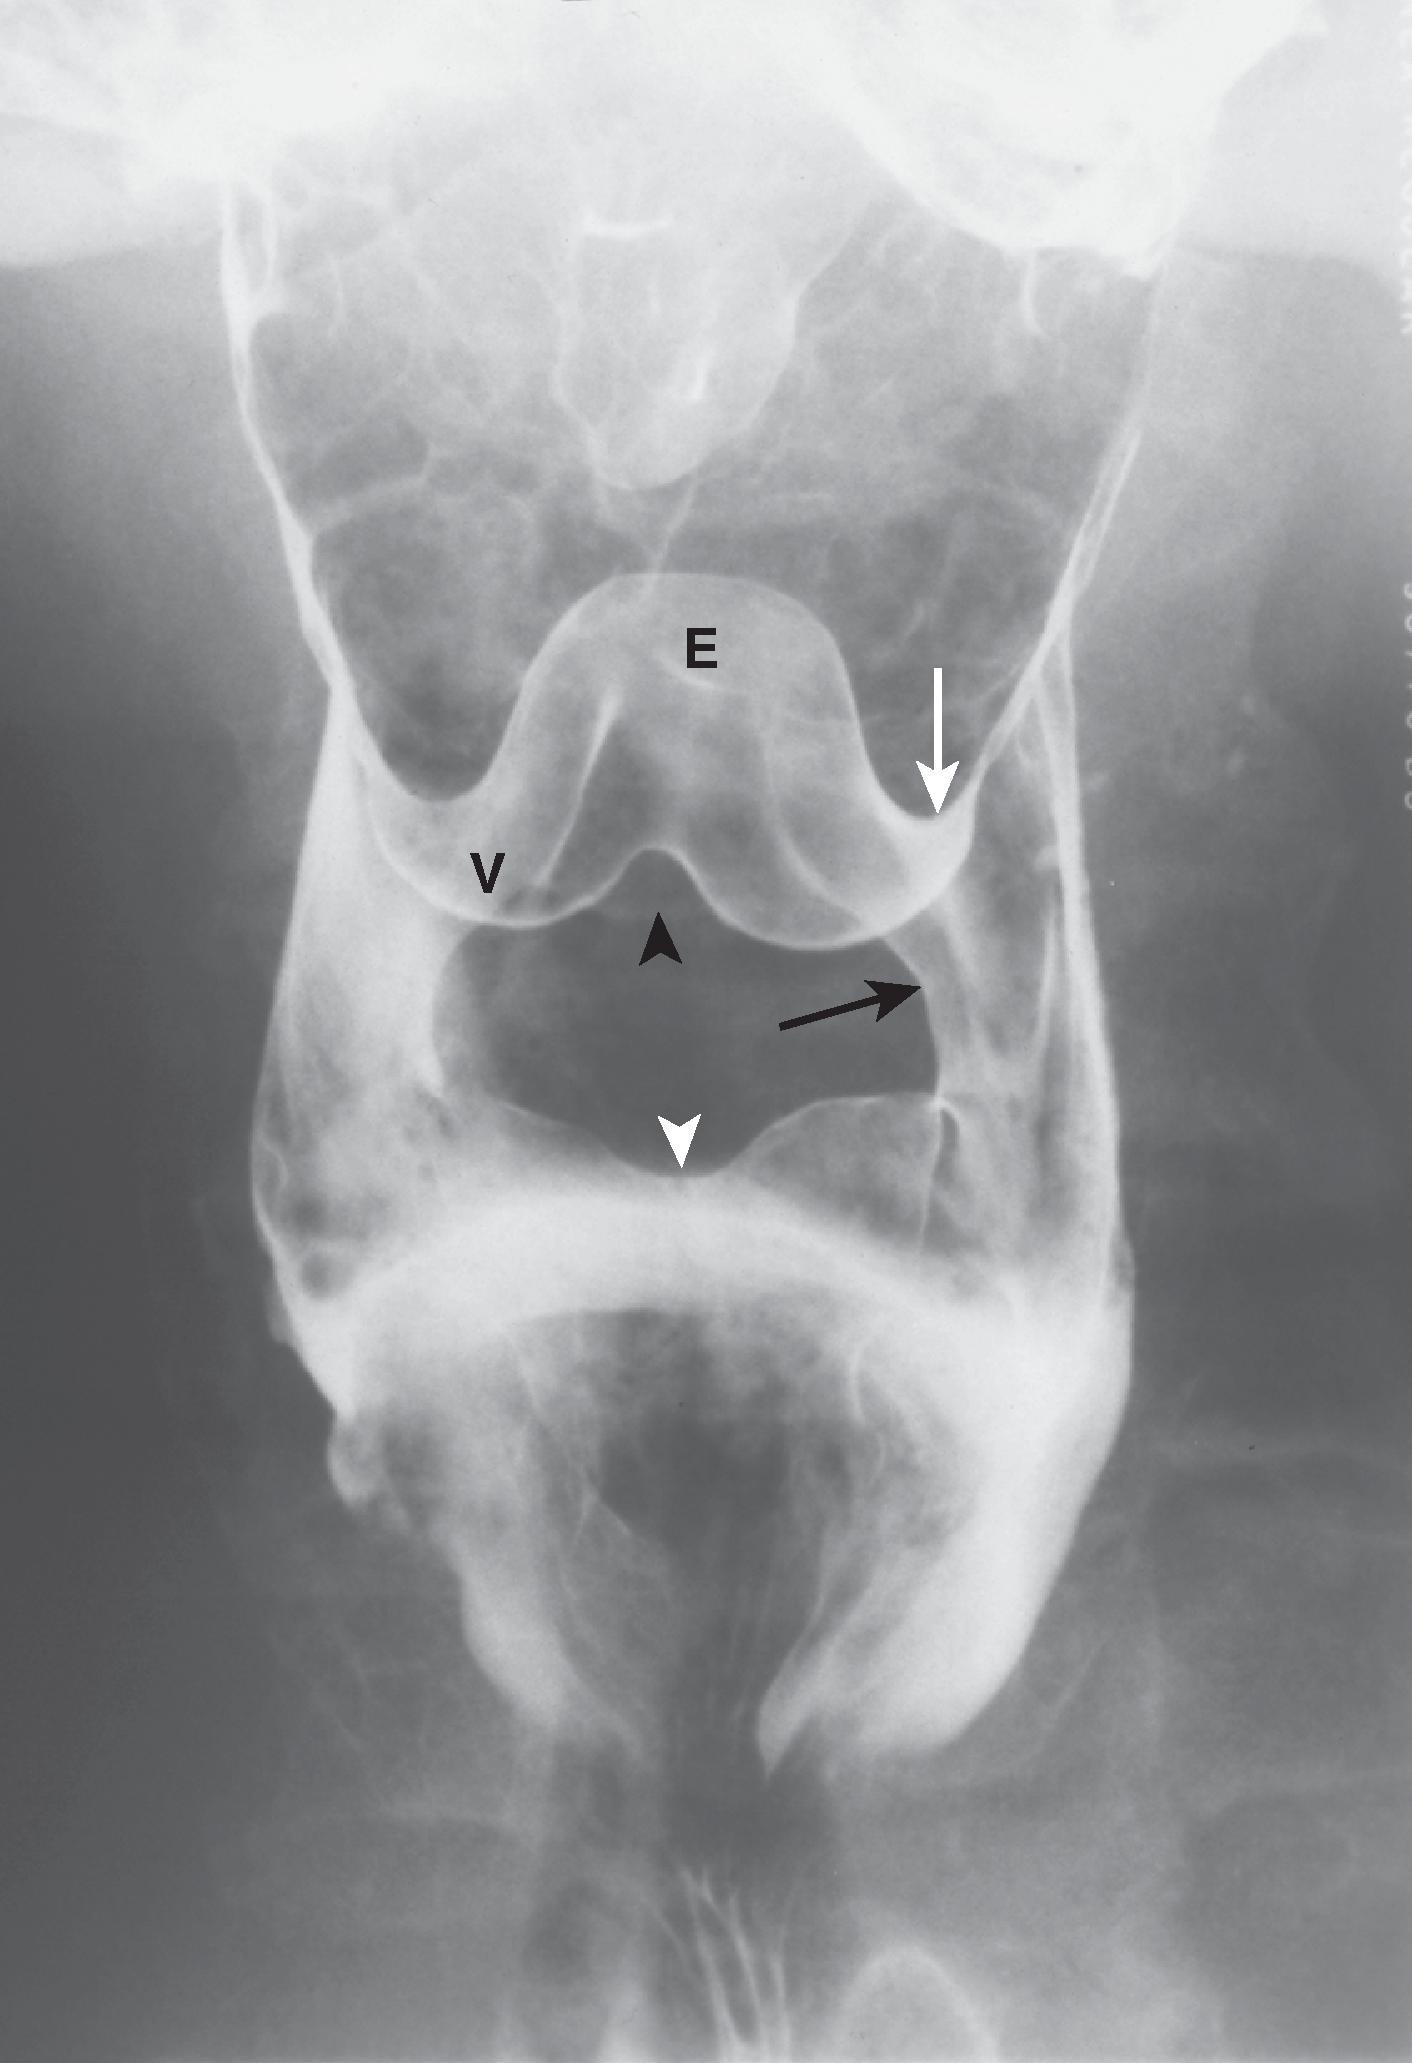 Fig. 4.3, Folds of the valleculae. Frontal view of the pharynx shows how the folds of the epiglottis and valleculae are accentuated by edema in a patient with chronic radiation change. The median glossoepiglottic fold ( black arrowhead ) divides the retroglottic space into the two valleculae (right vallecula [ V ]). The pharyngoepiglottic folds ( white arrow identifies the left pharyngoepiglottic fold) overlie the paired stylopharyngeal muscles and form part of the posterior wall of the valleculae. The epiglottic tip ( E ) and left aryepiglottic fold ( black arrow ) are also seen. Barium coats the laryngeal surface of the epiglottis because of laryngeal penetration. The interarytenoid notch ( white arrowhead ) lies between the swollen mucosa overlying the muscular processes of the arytenoid cartilages.